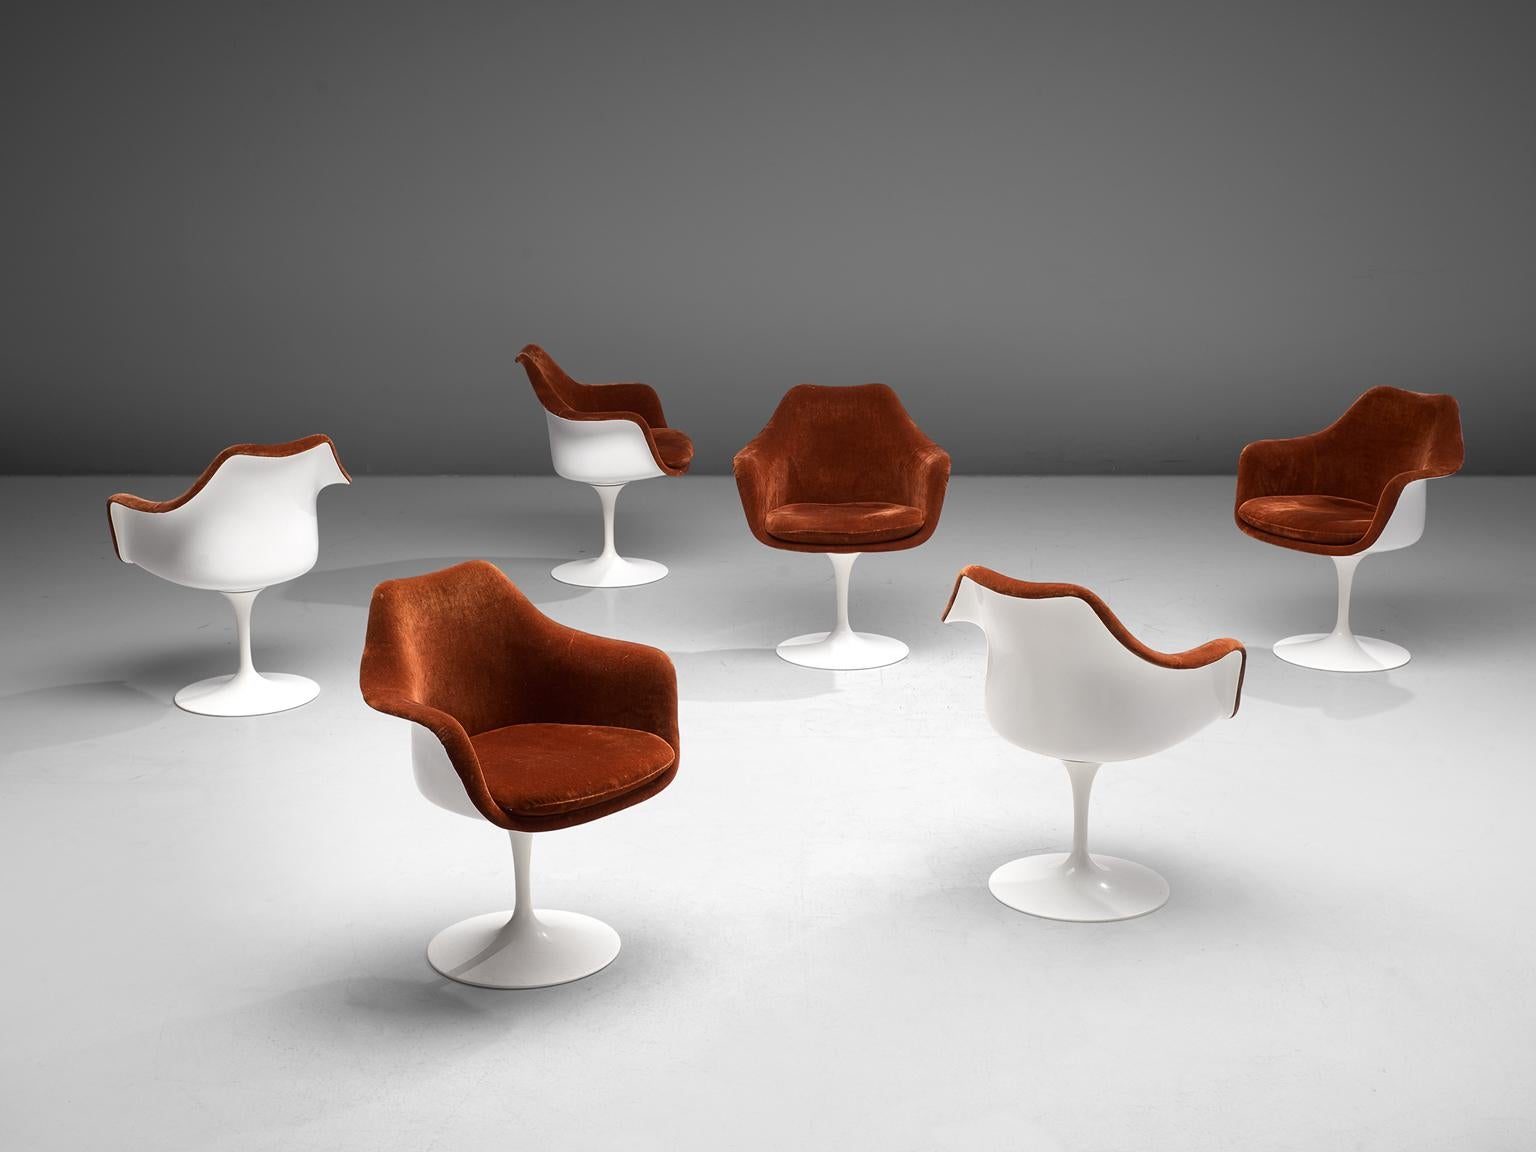 Eero Saarinen for Knoll, set of 6 'Tulip' armchairs, fiberglass, aluminum and velvet, United States, 1955-56.

These six armchairs with red-brown velvet seats are from the Tulip collection and were designed by Eero Saarinen for Knoll